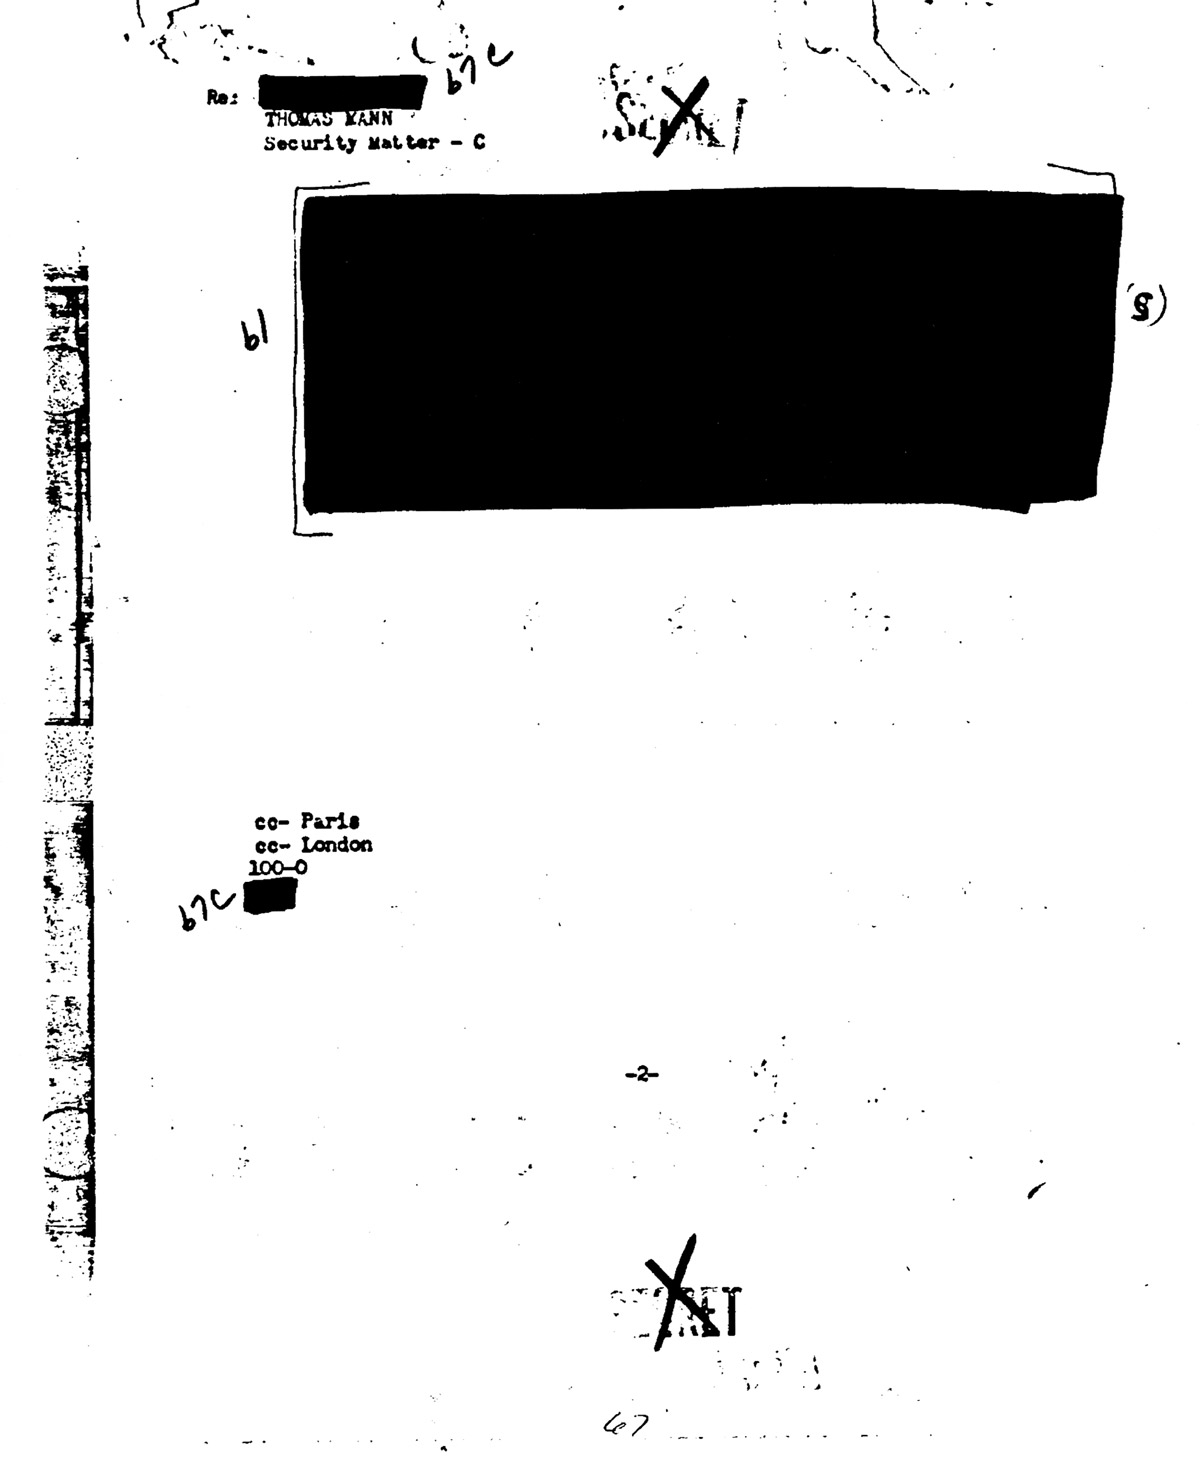 A heavily redacted government document related to the author Thomas Mann.